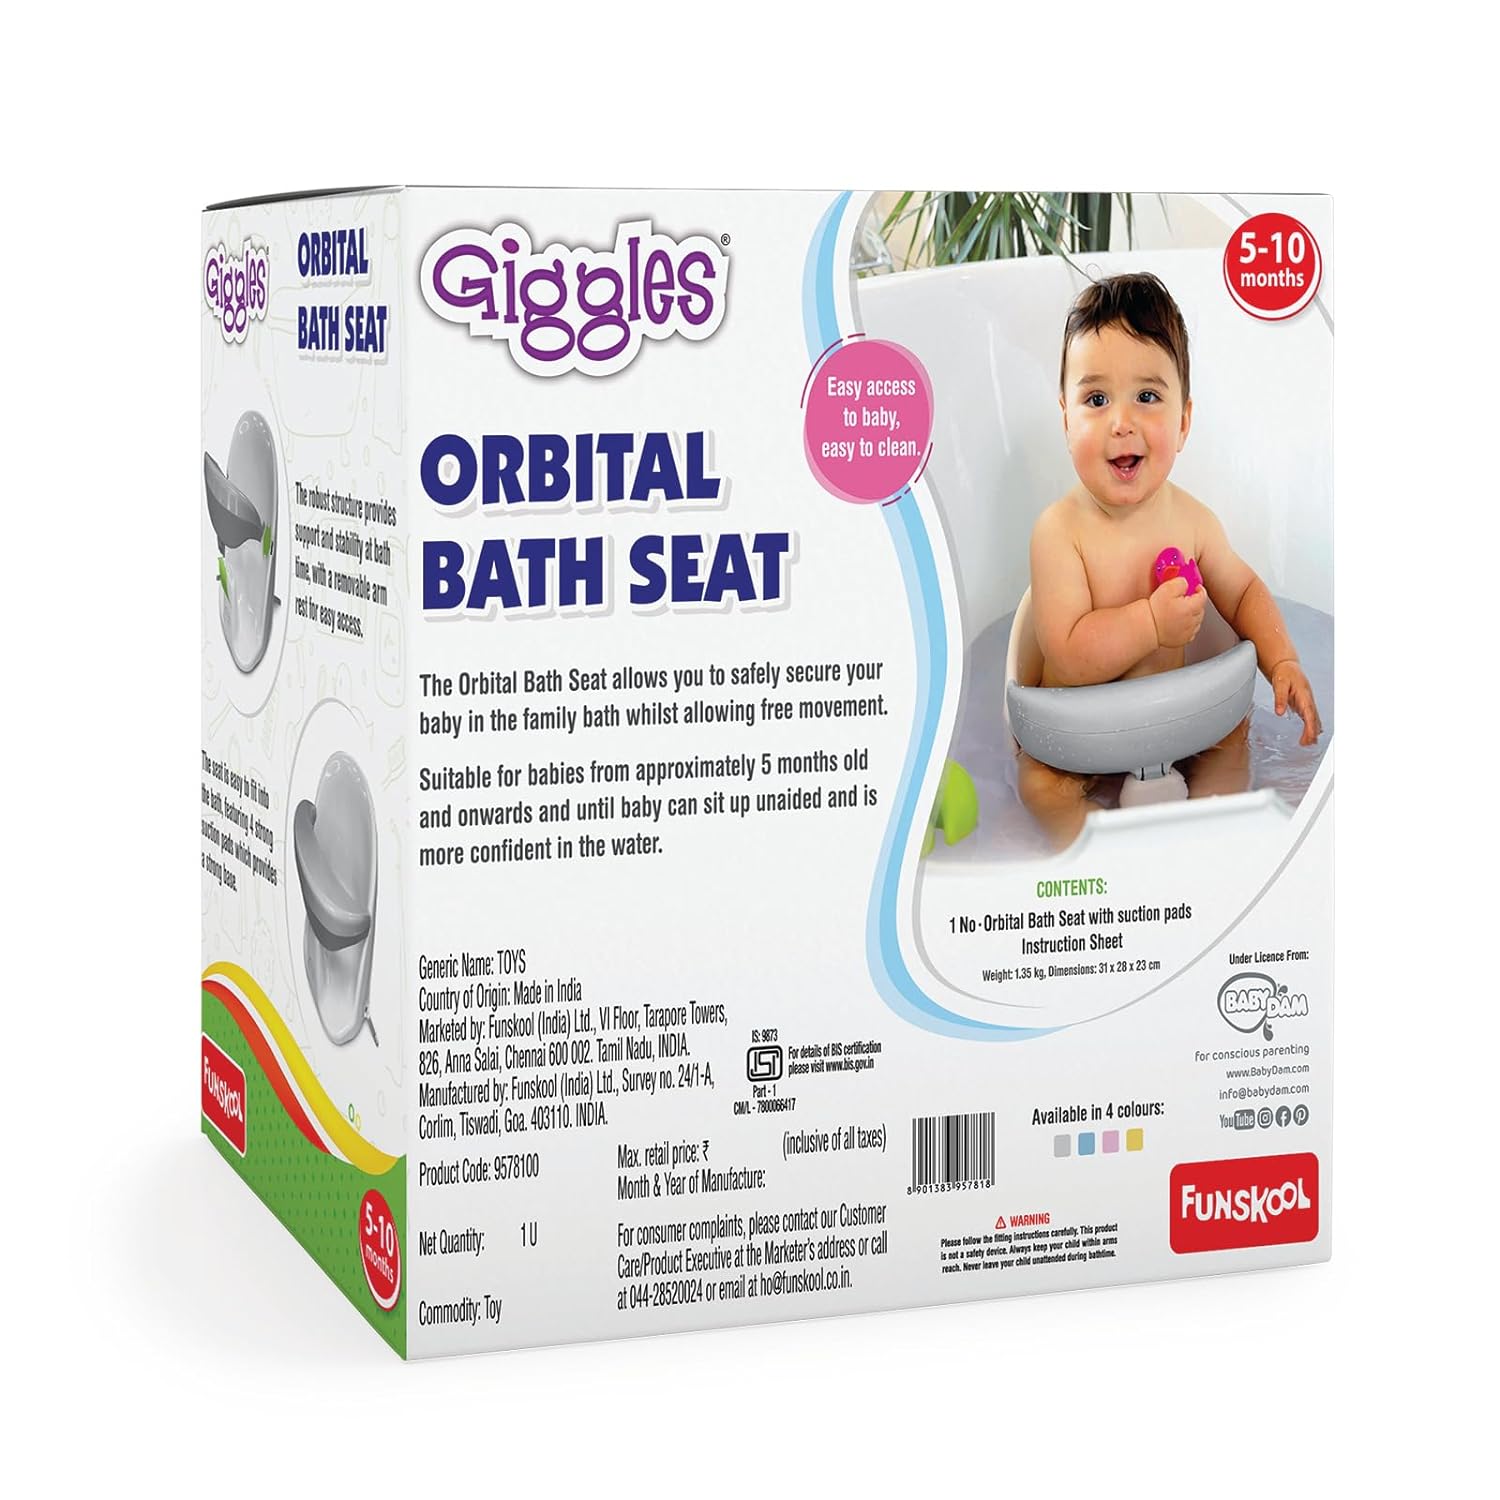 Funskool Giggles Orbital Bath Infant Bath Seat with Ergonomically Designed Featuring 360 Degree Rotation for Sitting up and Suction Pads for Babies 5 Months & Up